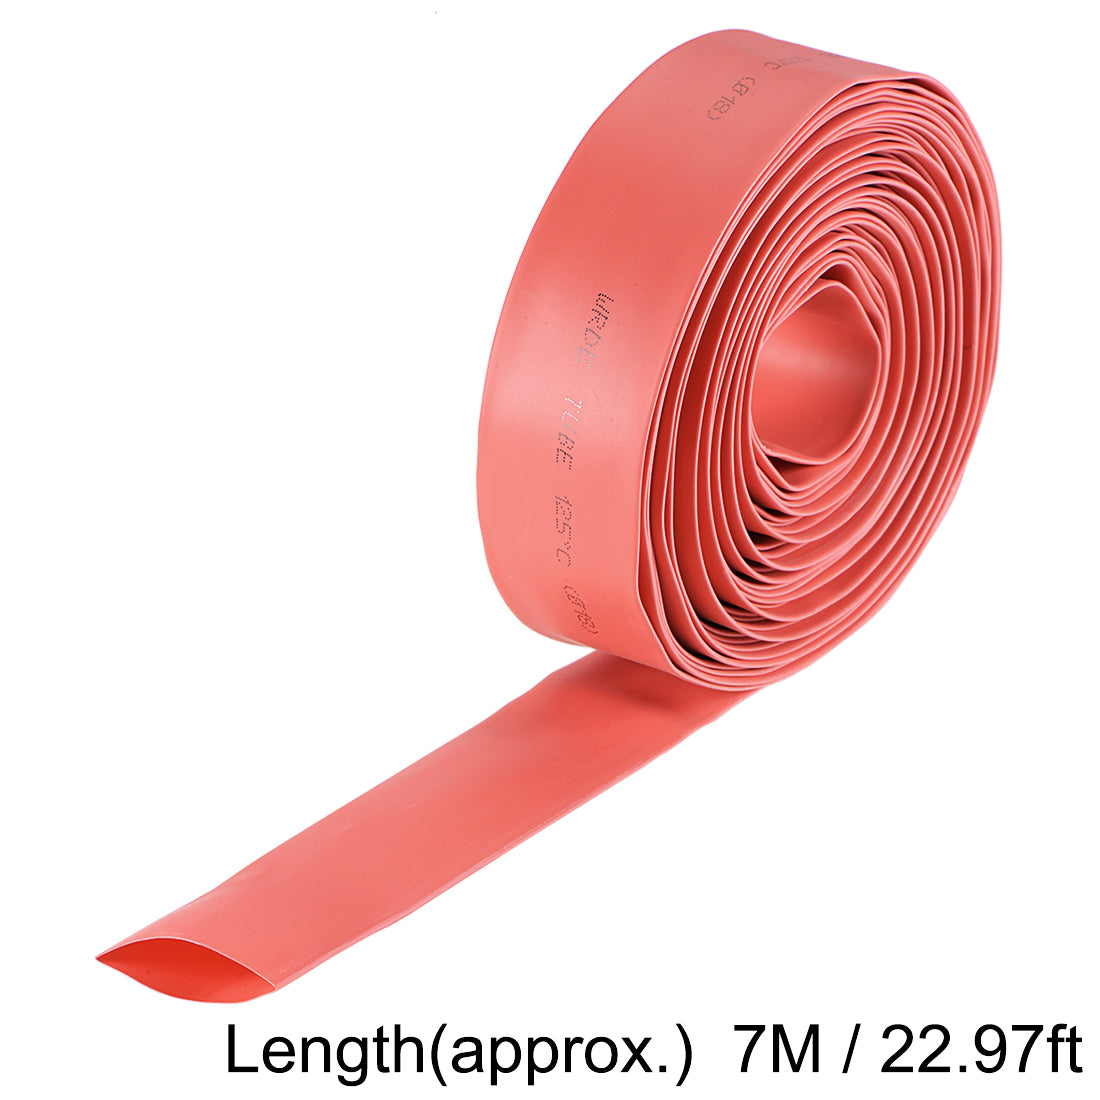 uxcell Uxcell Heat Shrink Tubing, 18mm Dia 30mm Flat Width 2:1 rate 7m - Red